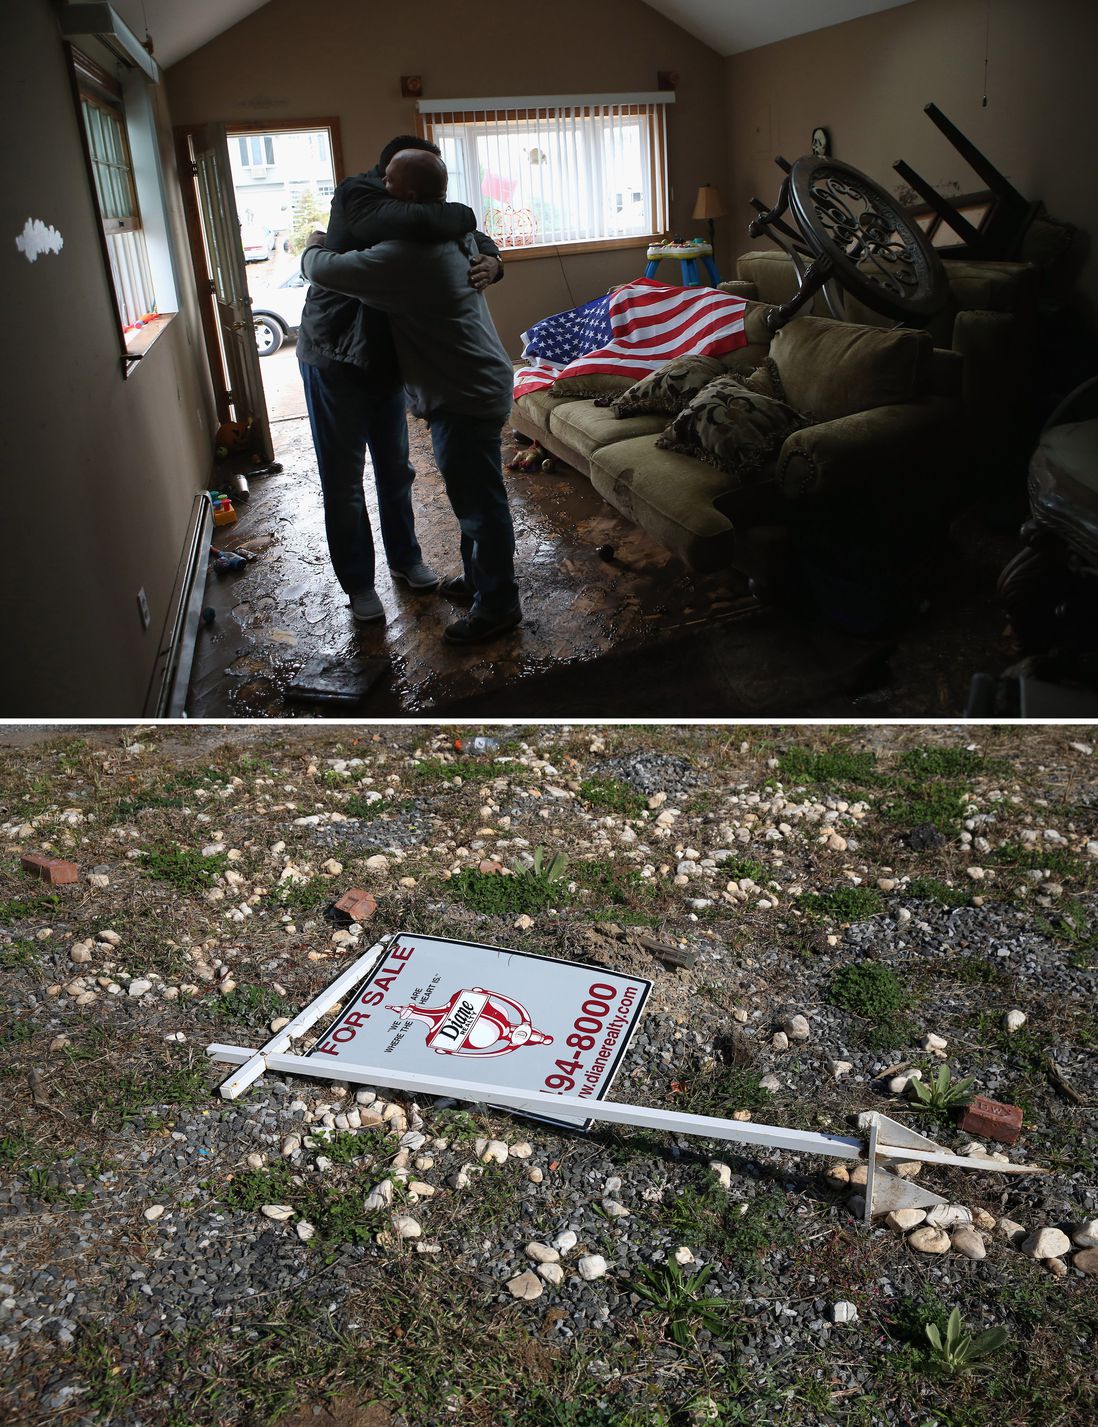 [Top] Homeowner Michael Russo (R), is comforted by friend Joseph Bono on November 1, 2012 in the Ocean Breeze area of Staten Island. The first floor of Russo's home was completely flooded by the ocean surge caused by superstorm Sandy. [Bottom] A 'for sale' sign lies on an empty lot where Joseph Bono's home was demolished due to Hurricane Sandy flood damage on October 17, 2013.